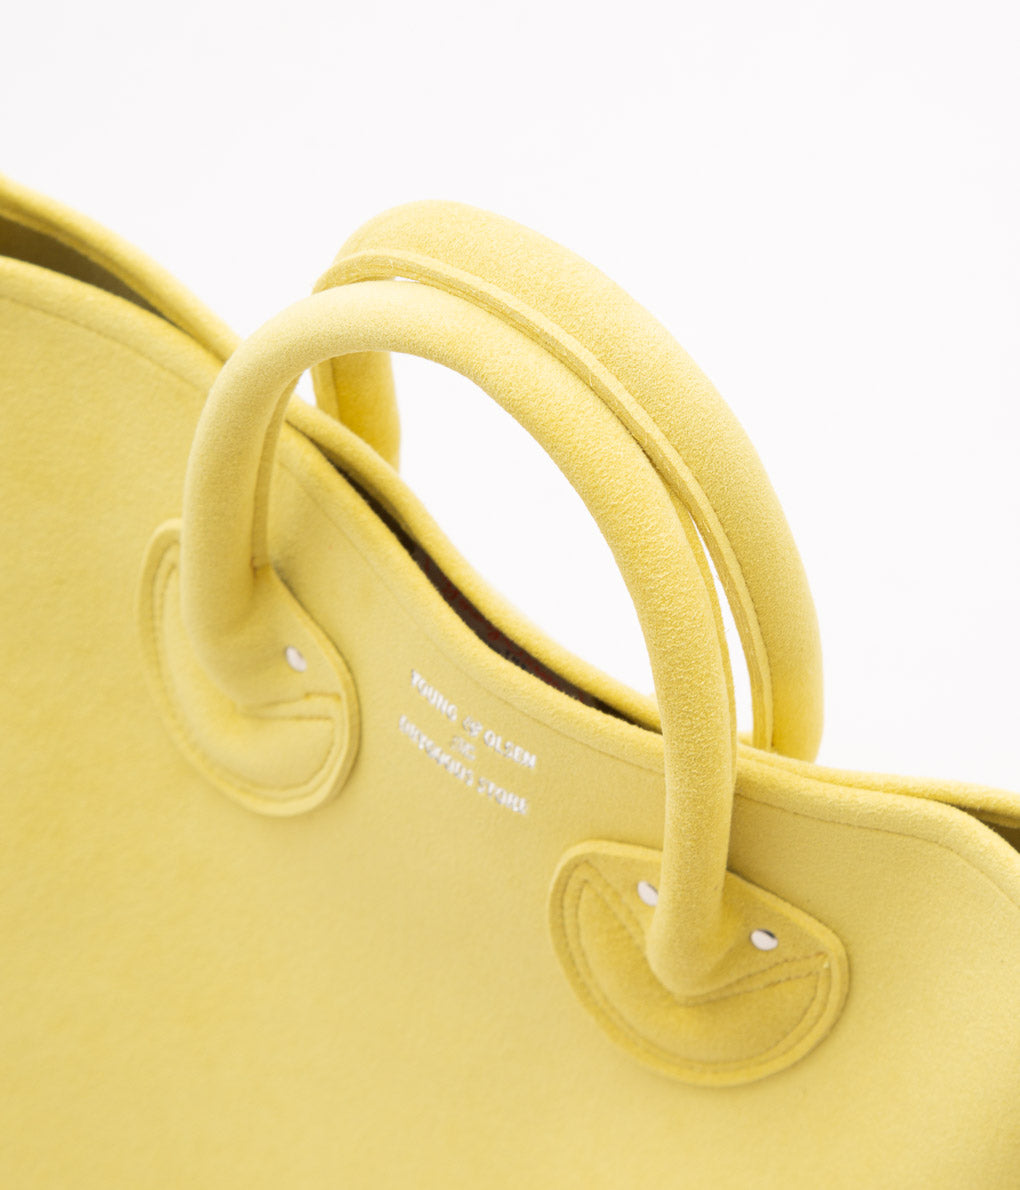 YOUNG&OLSEN THE DRYGOODS STORE ''ULTRASUEDE_ TOTE M'' (CITRON YELLOW)